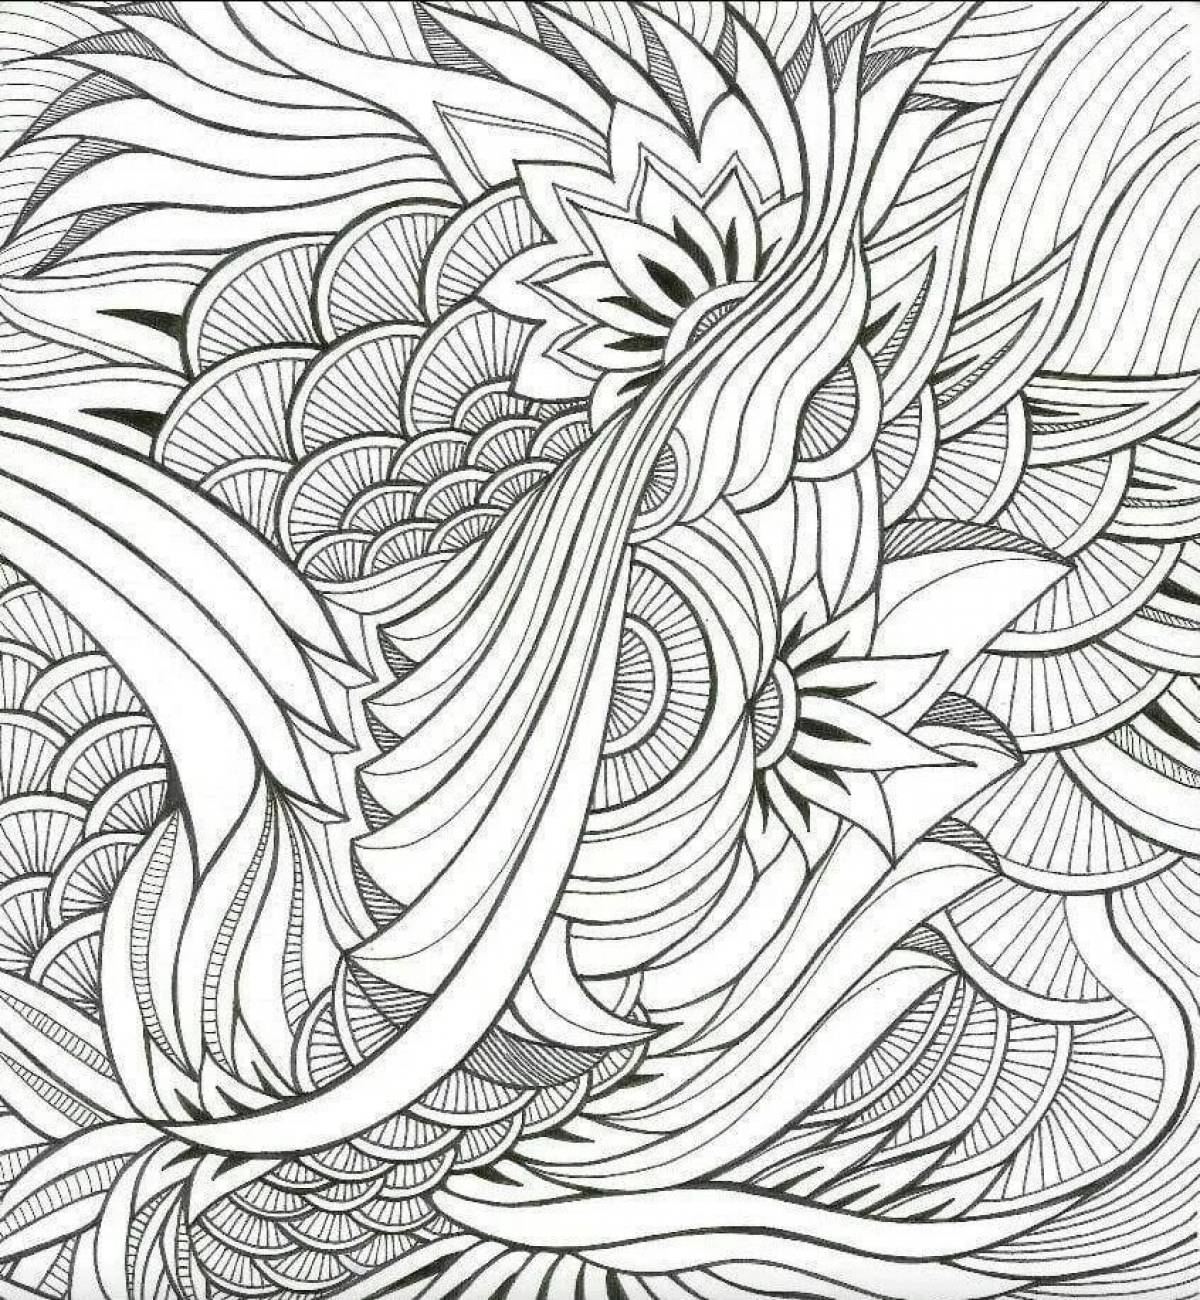 Coloring sublime antistress art